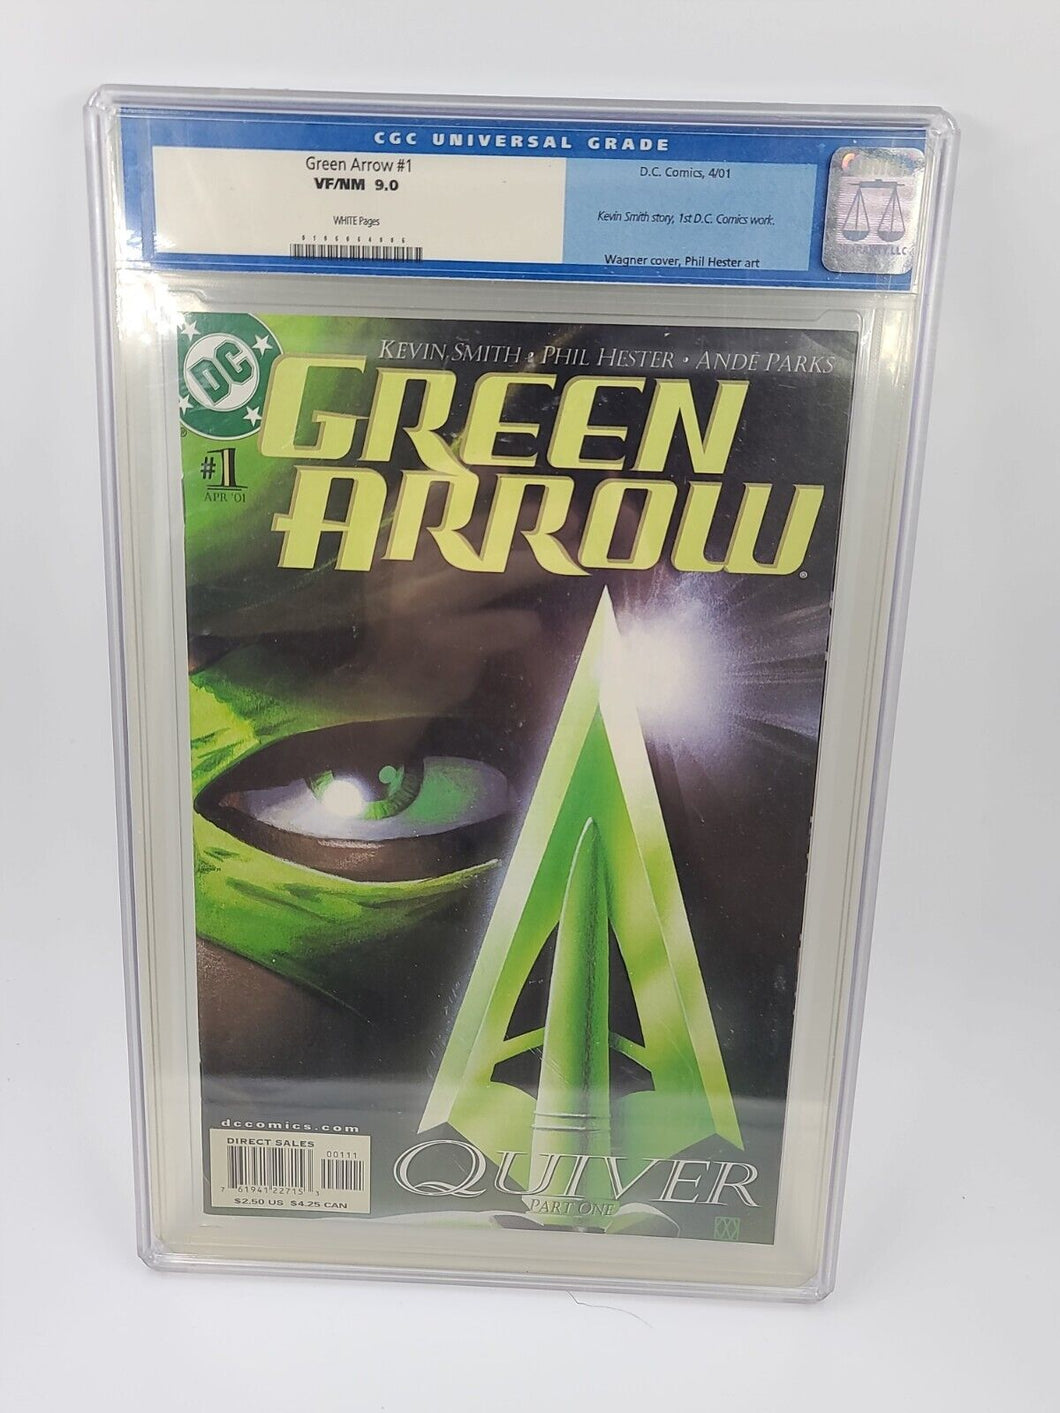 DC 2001 GREEN ARROW Comic Book Issue 1 Kevin Smith 1st Issue CGC 9.0 (kp01)